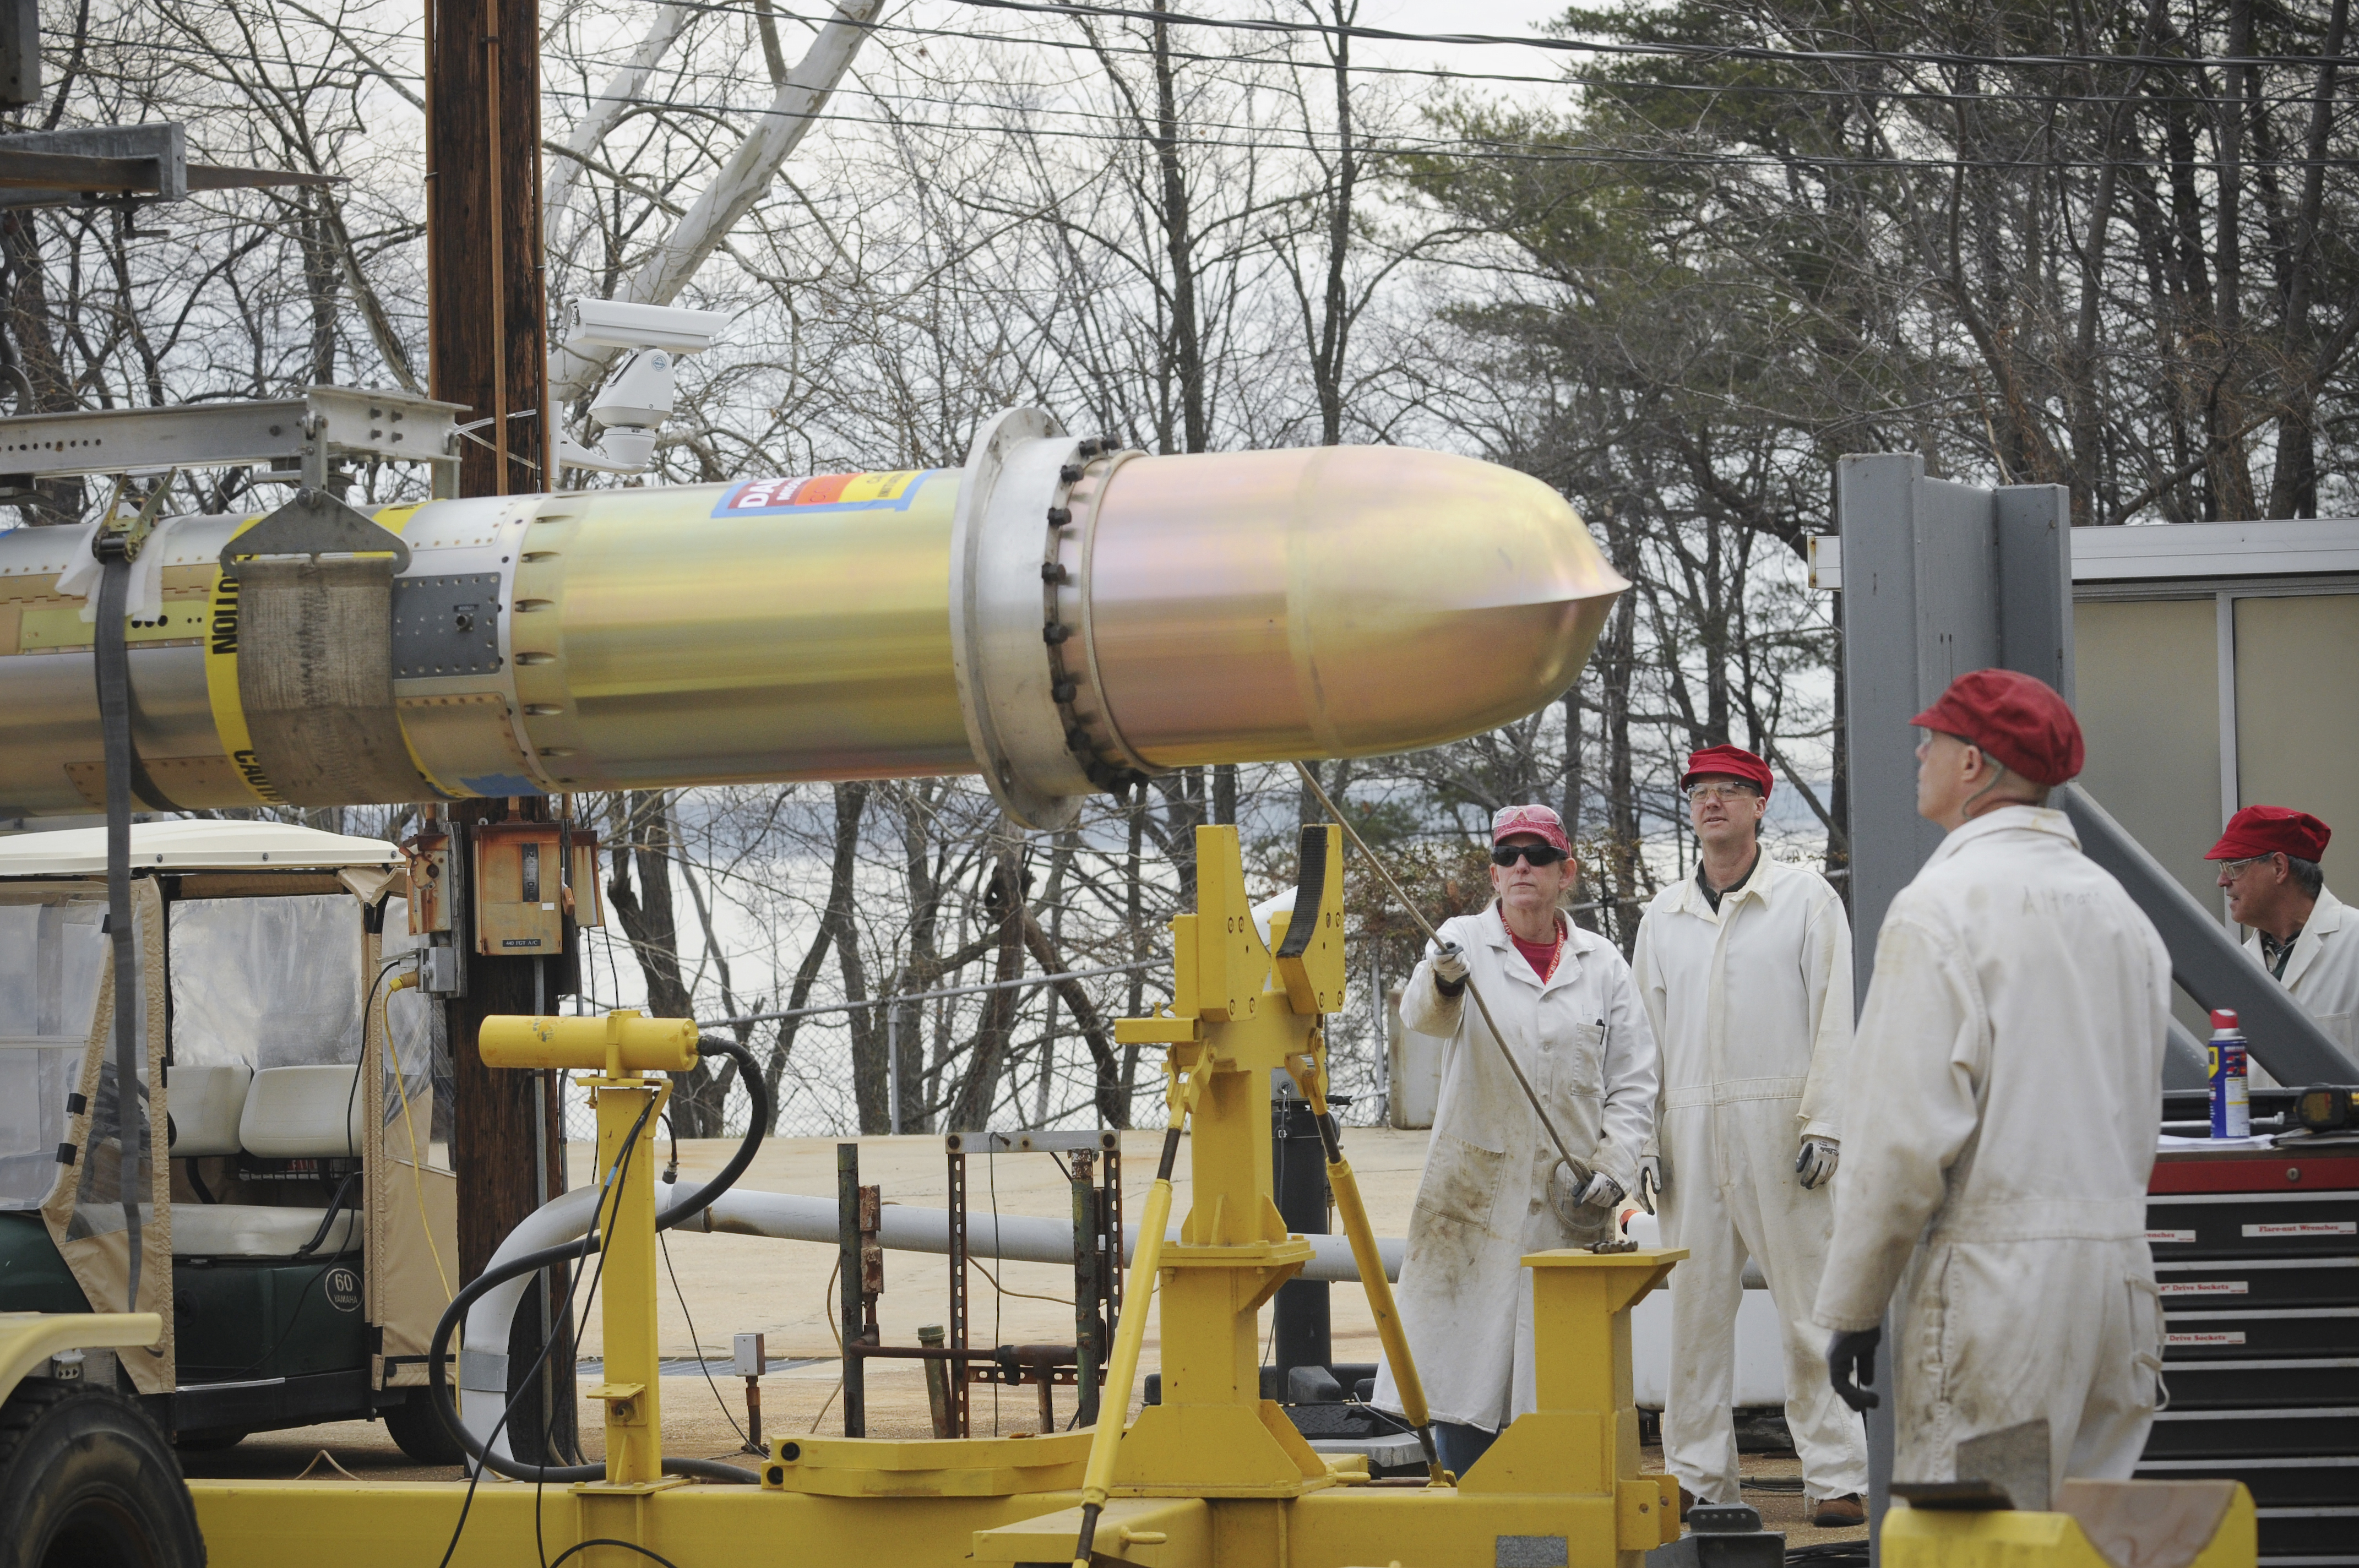 150317-N-MF696-071 INDIAN HEAD, Md. (March 17, 2015) Members of the Explosive Ordnance Disposal Technology Division team at Naval Surface Warfare Center, Indian Head prepare a Tomahawk missile for a functional ground test at the Large Motor Test Facility in Indian Head, Md. The event marks the 84th functional ground test the Division has conducted since the program began 25 years ago. (U.S. Navy photo by Monica McCoy/Released)